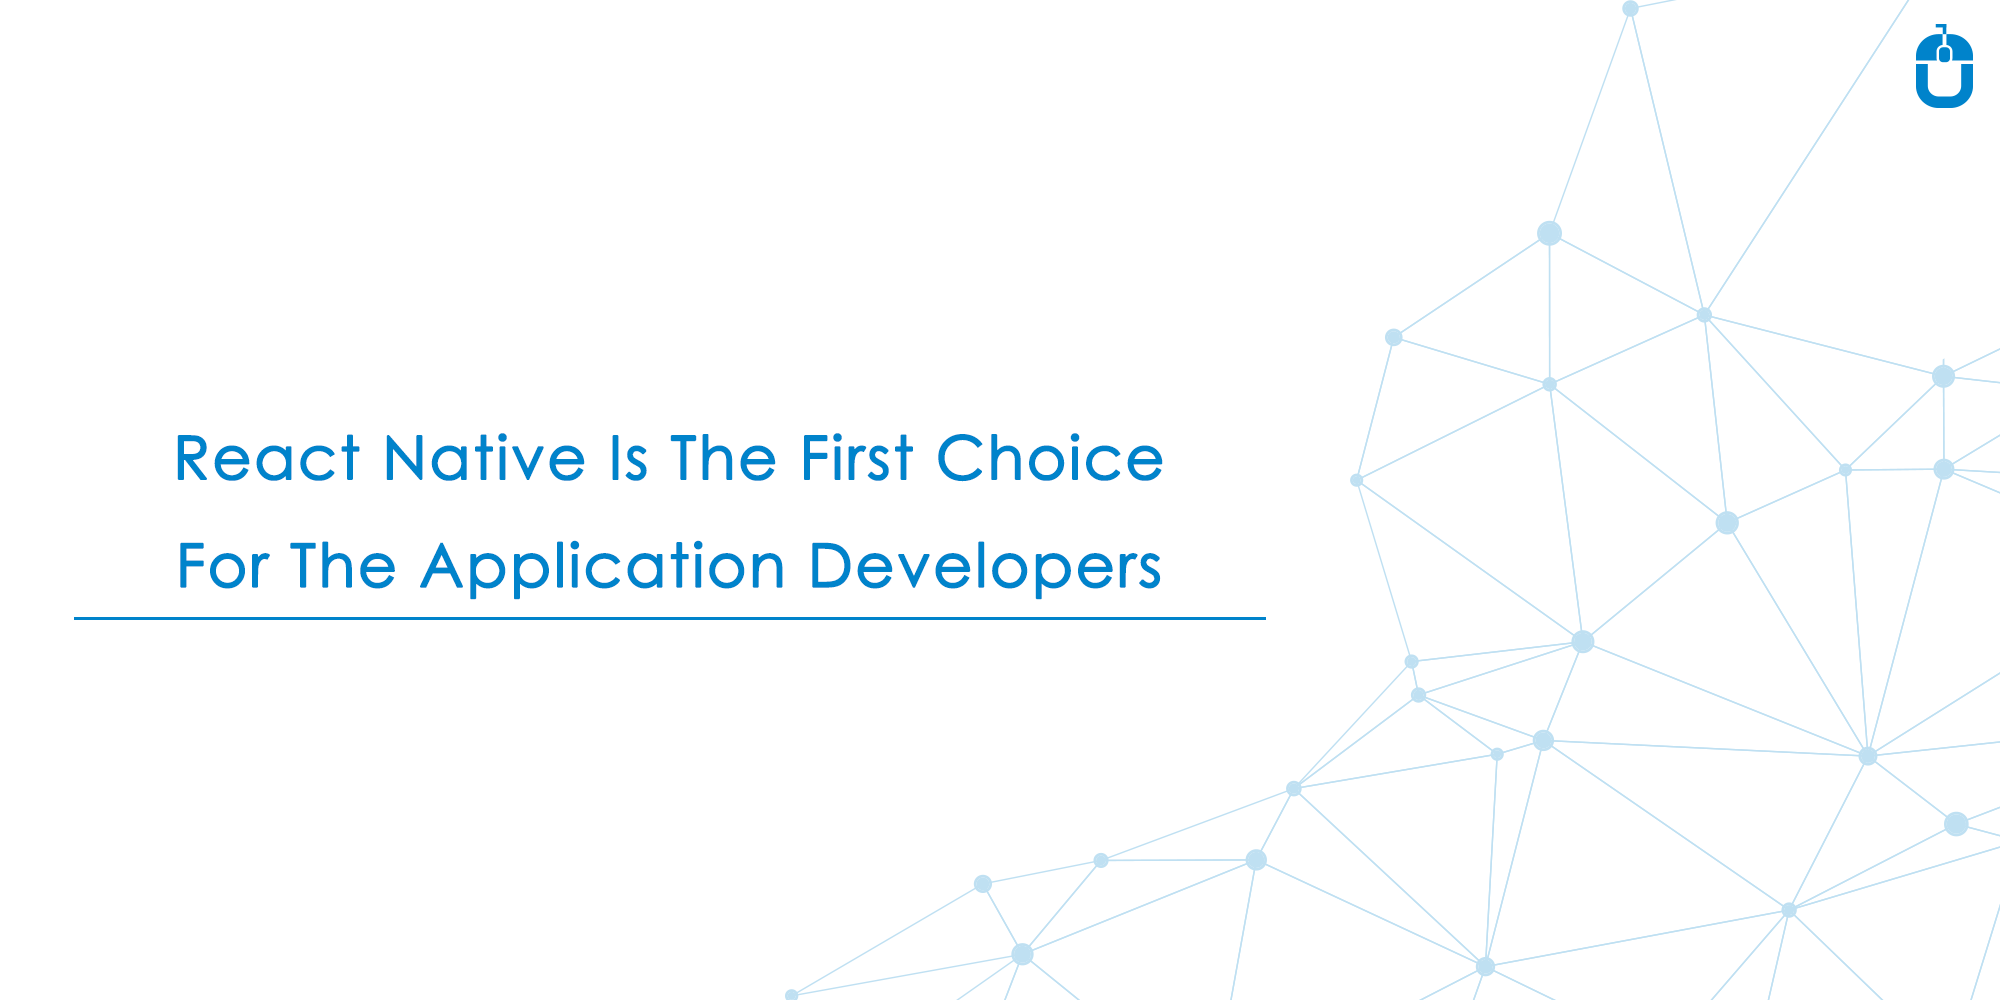 React Native Is The First Choice For The Application Developers